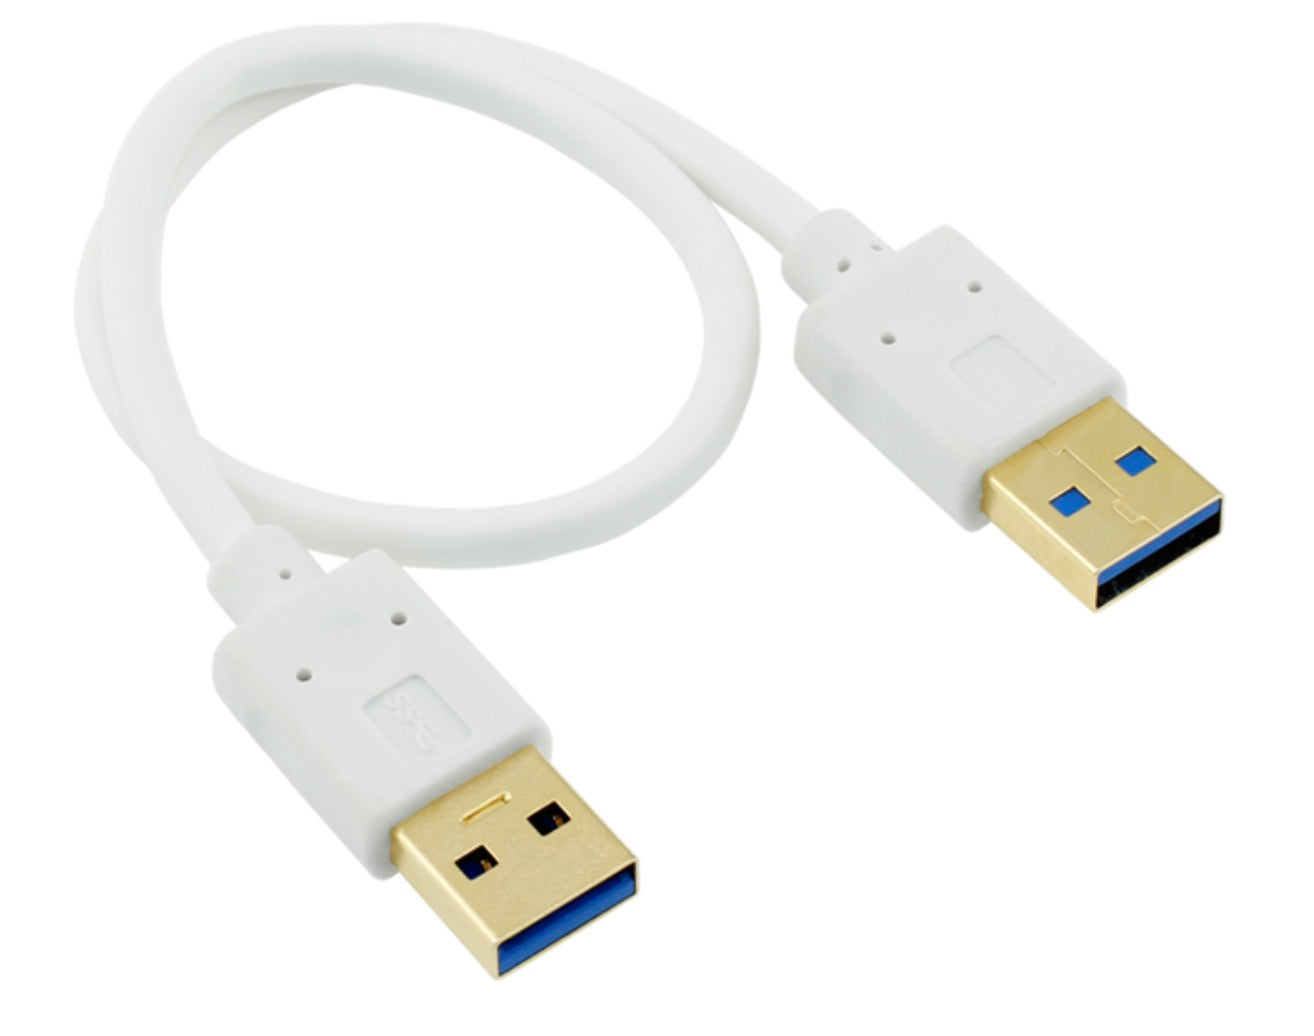 Ultra Slim USB 3.0 Type-A Male to Male Data Cable 1m